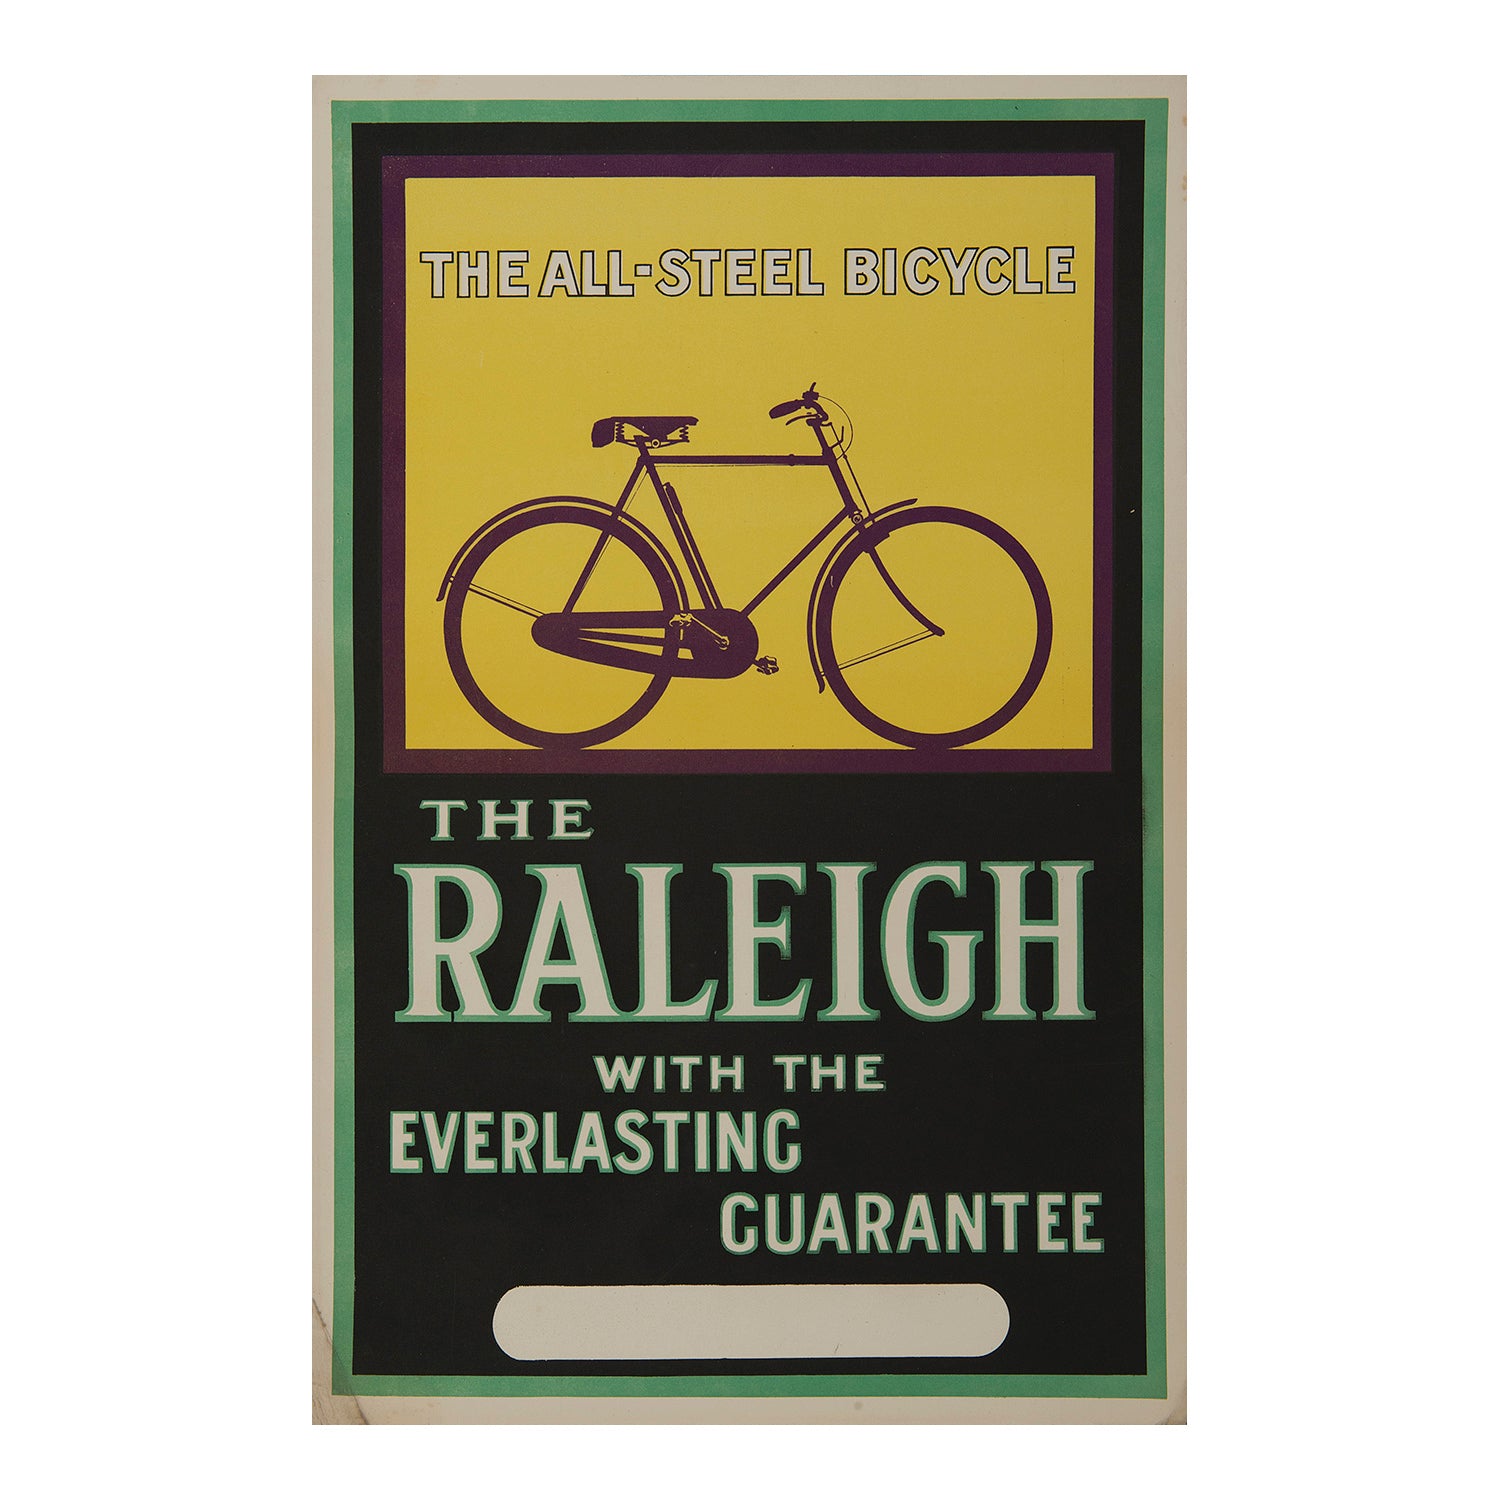 Original vintage advertising poster for the Raleigh ‘All Steel Bicycle’, c.1935. The image features a bicycle and the branding 'The Raleigh, with the everlasting guarantee'.